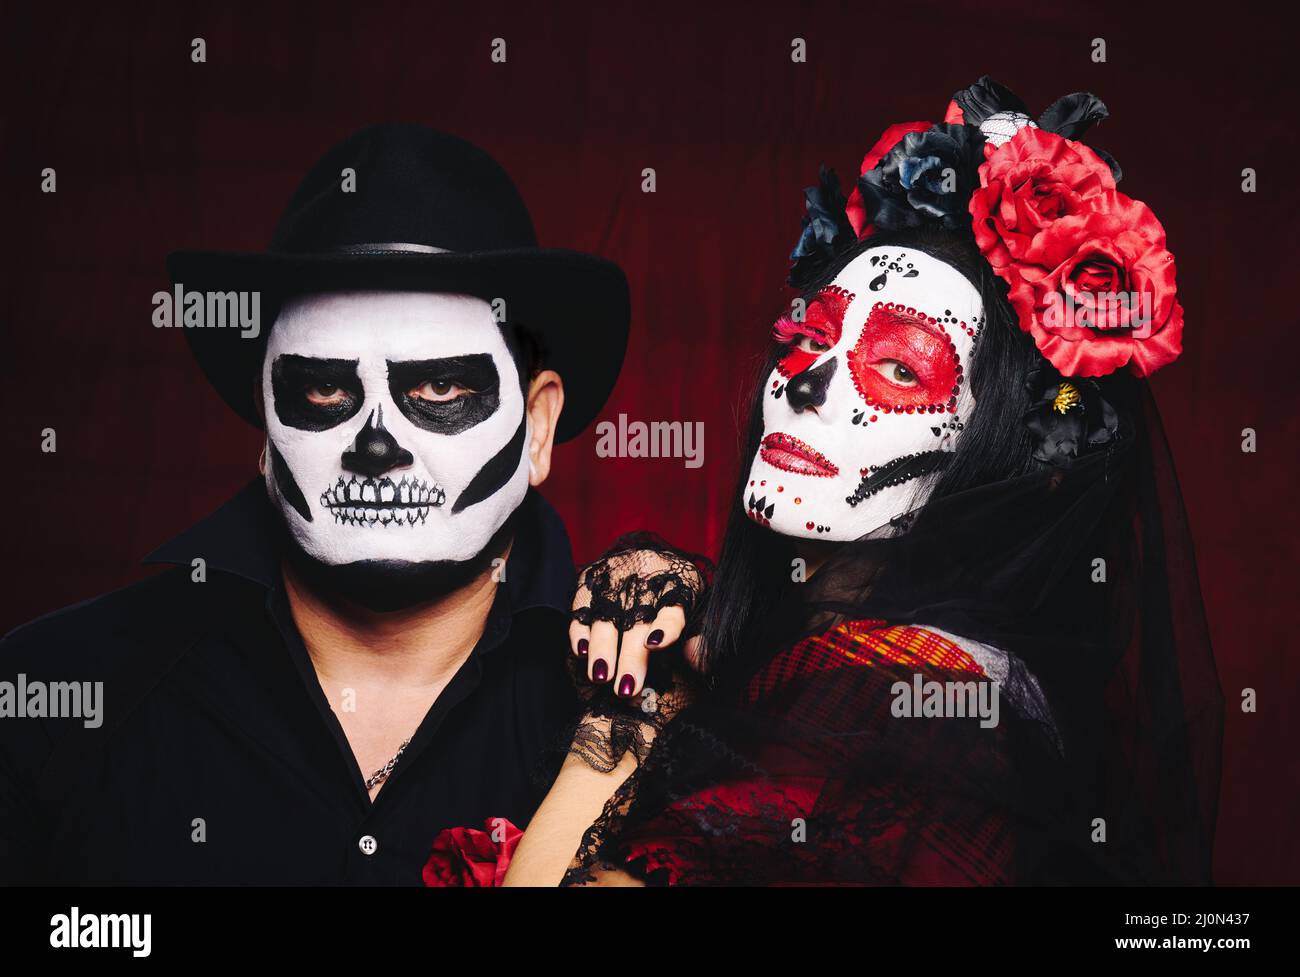 Beautiful woman with a sugar skull makeup with a wreath of flowers on her head and a skeleton man in a black hat Stock Photo